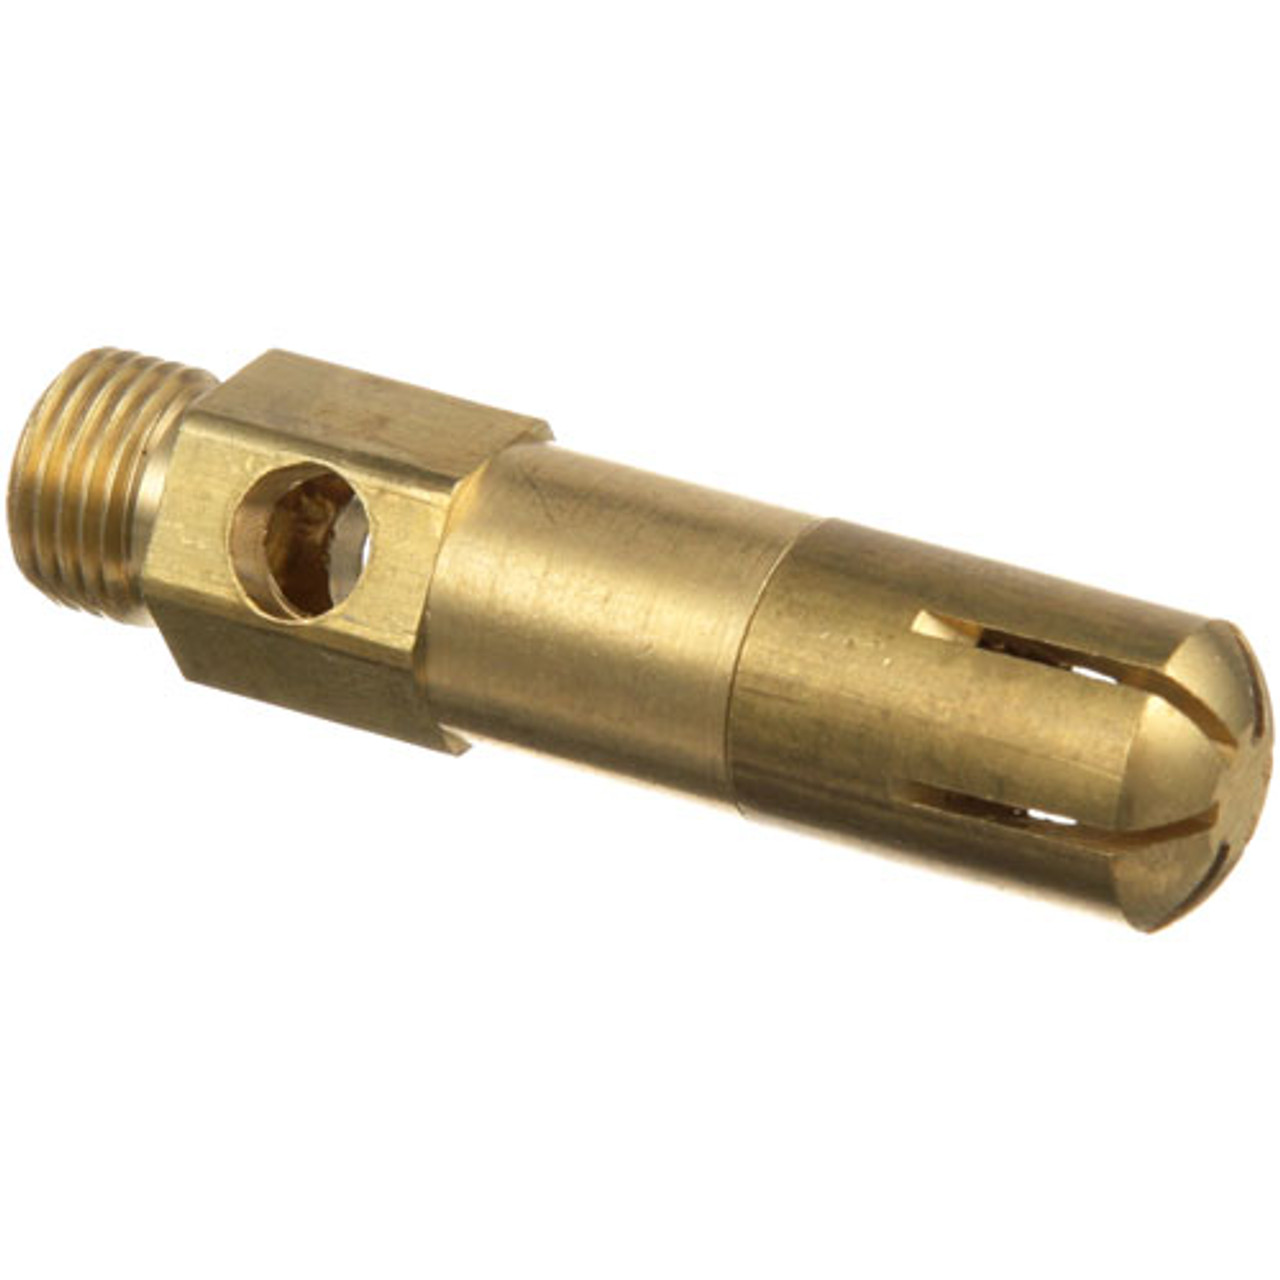 Burner Jet 9/16 Brass - Replacement Part For Randell HDGAS649